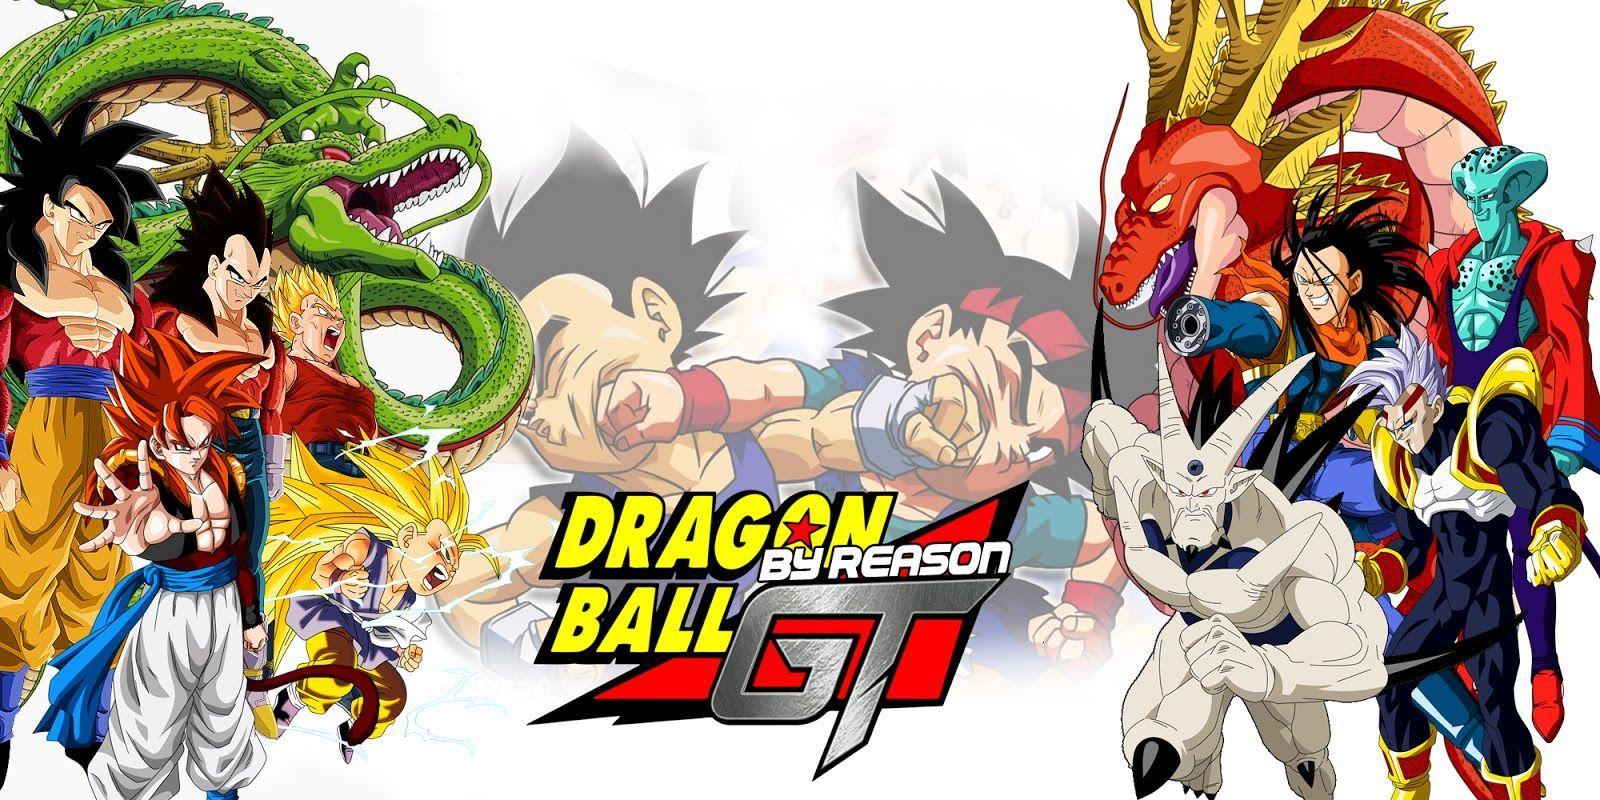 Dragon Ball Gt Wallpapers - Top Free Dragon Ball Gt Backgrounds